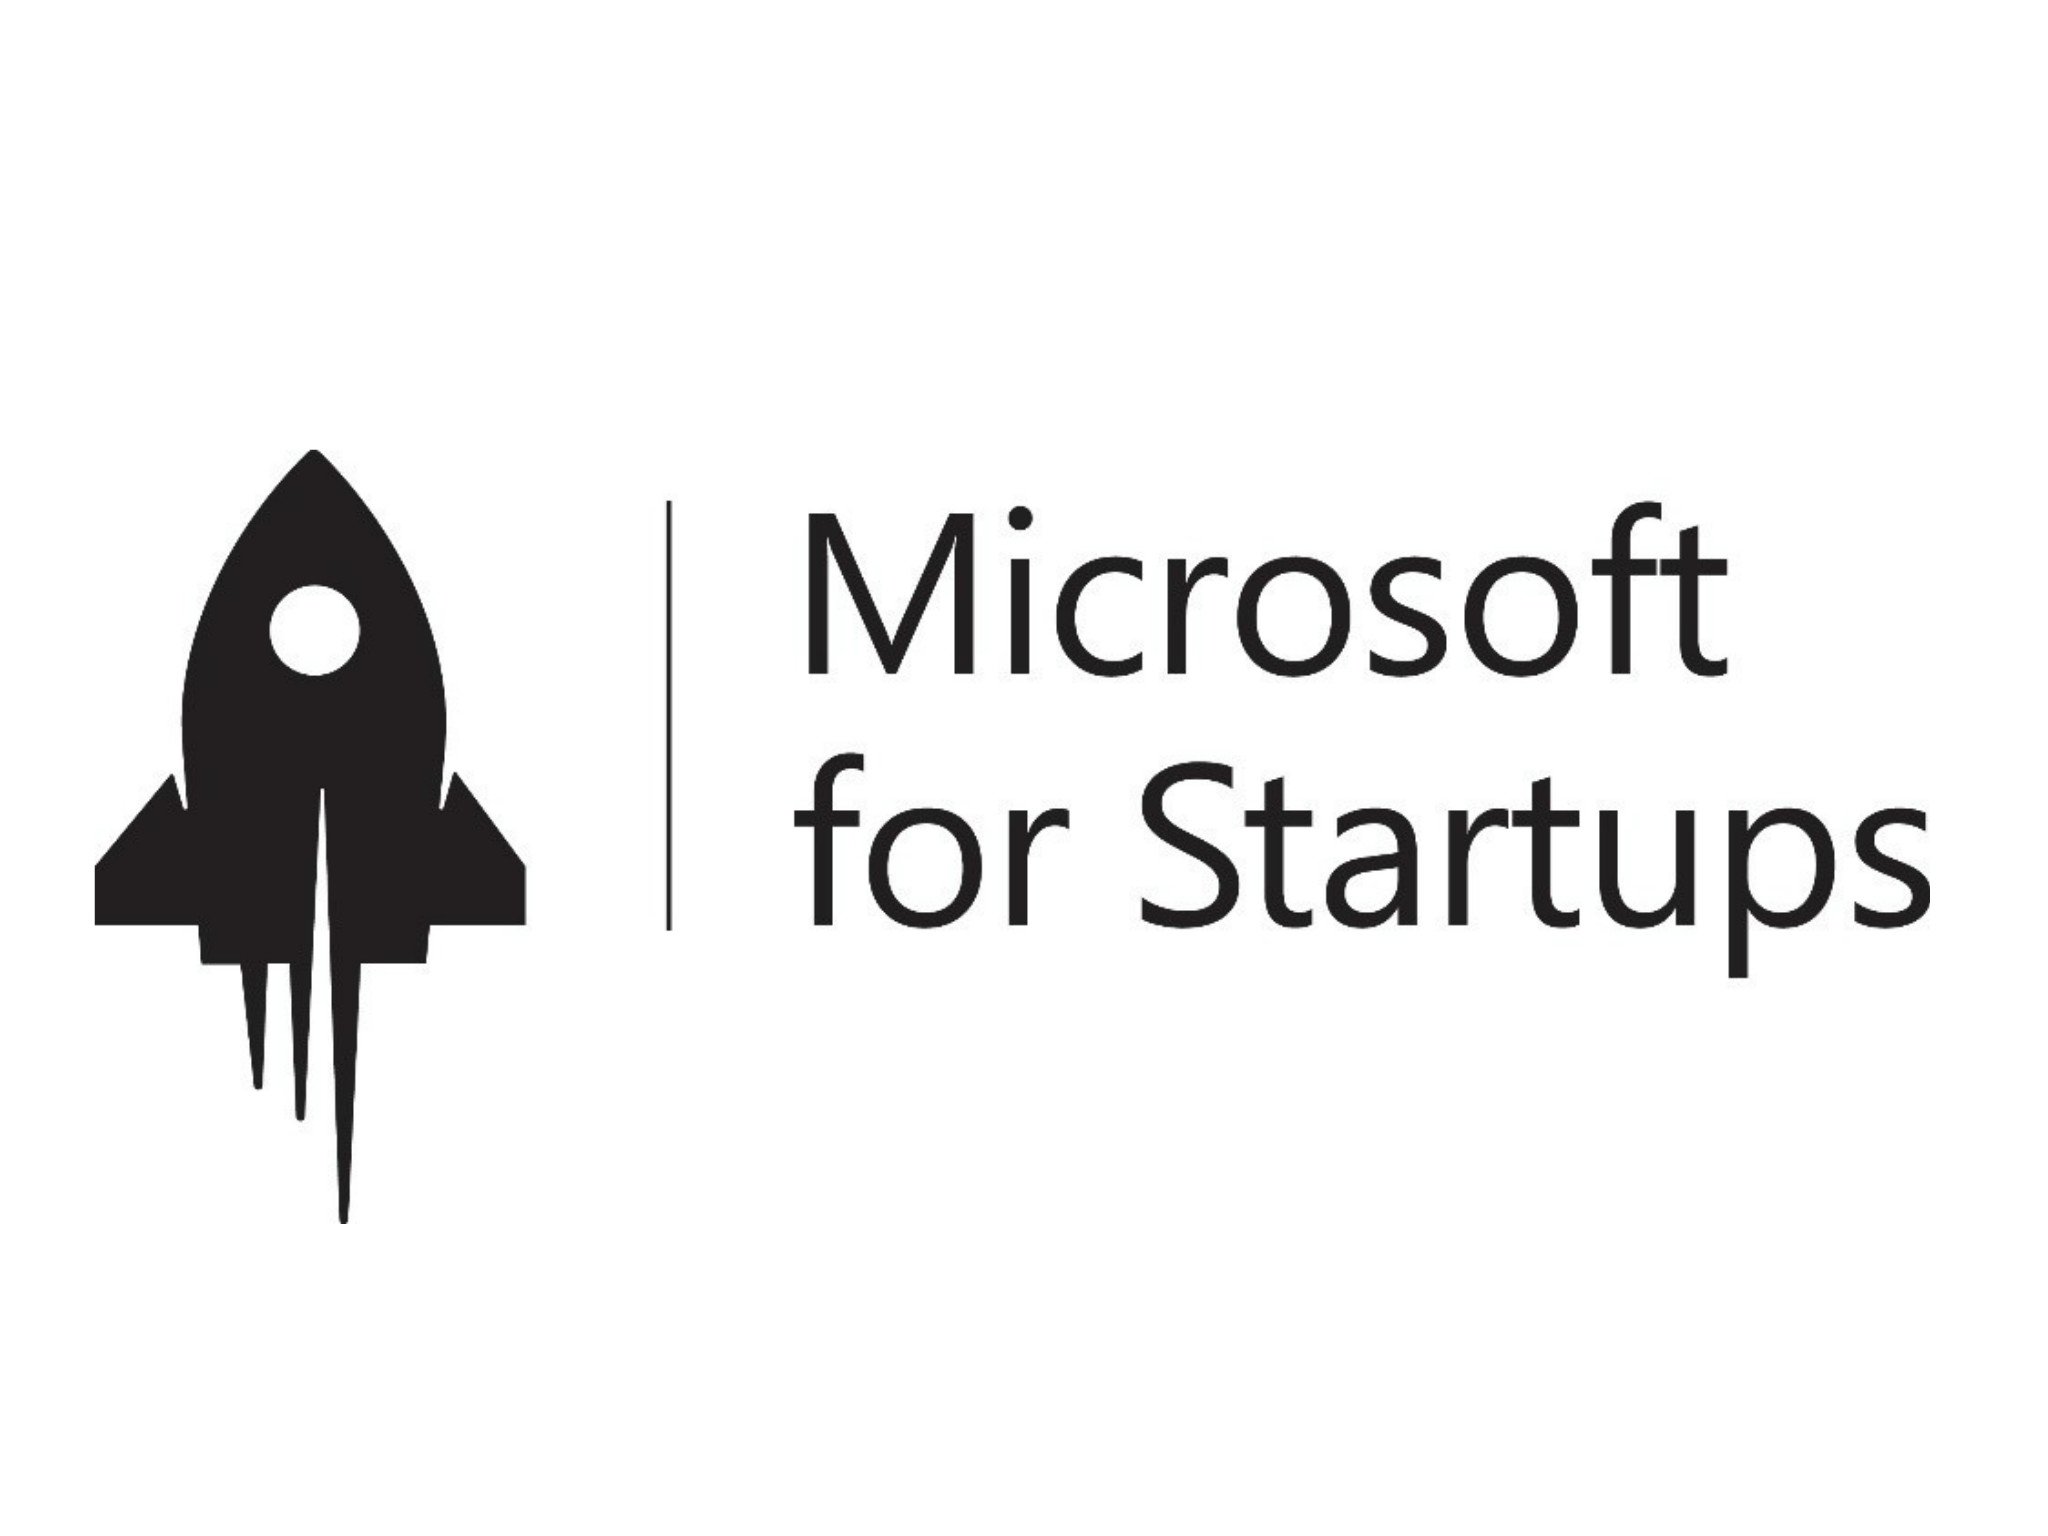 Microsoft commits $500 million over next two years to new startup program